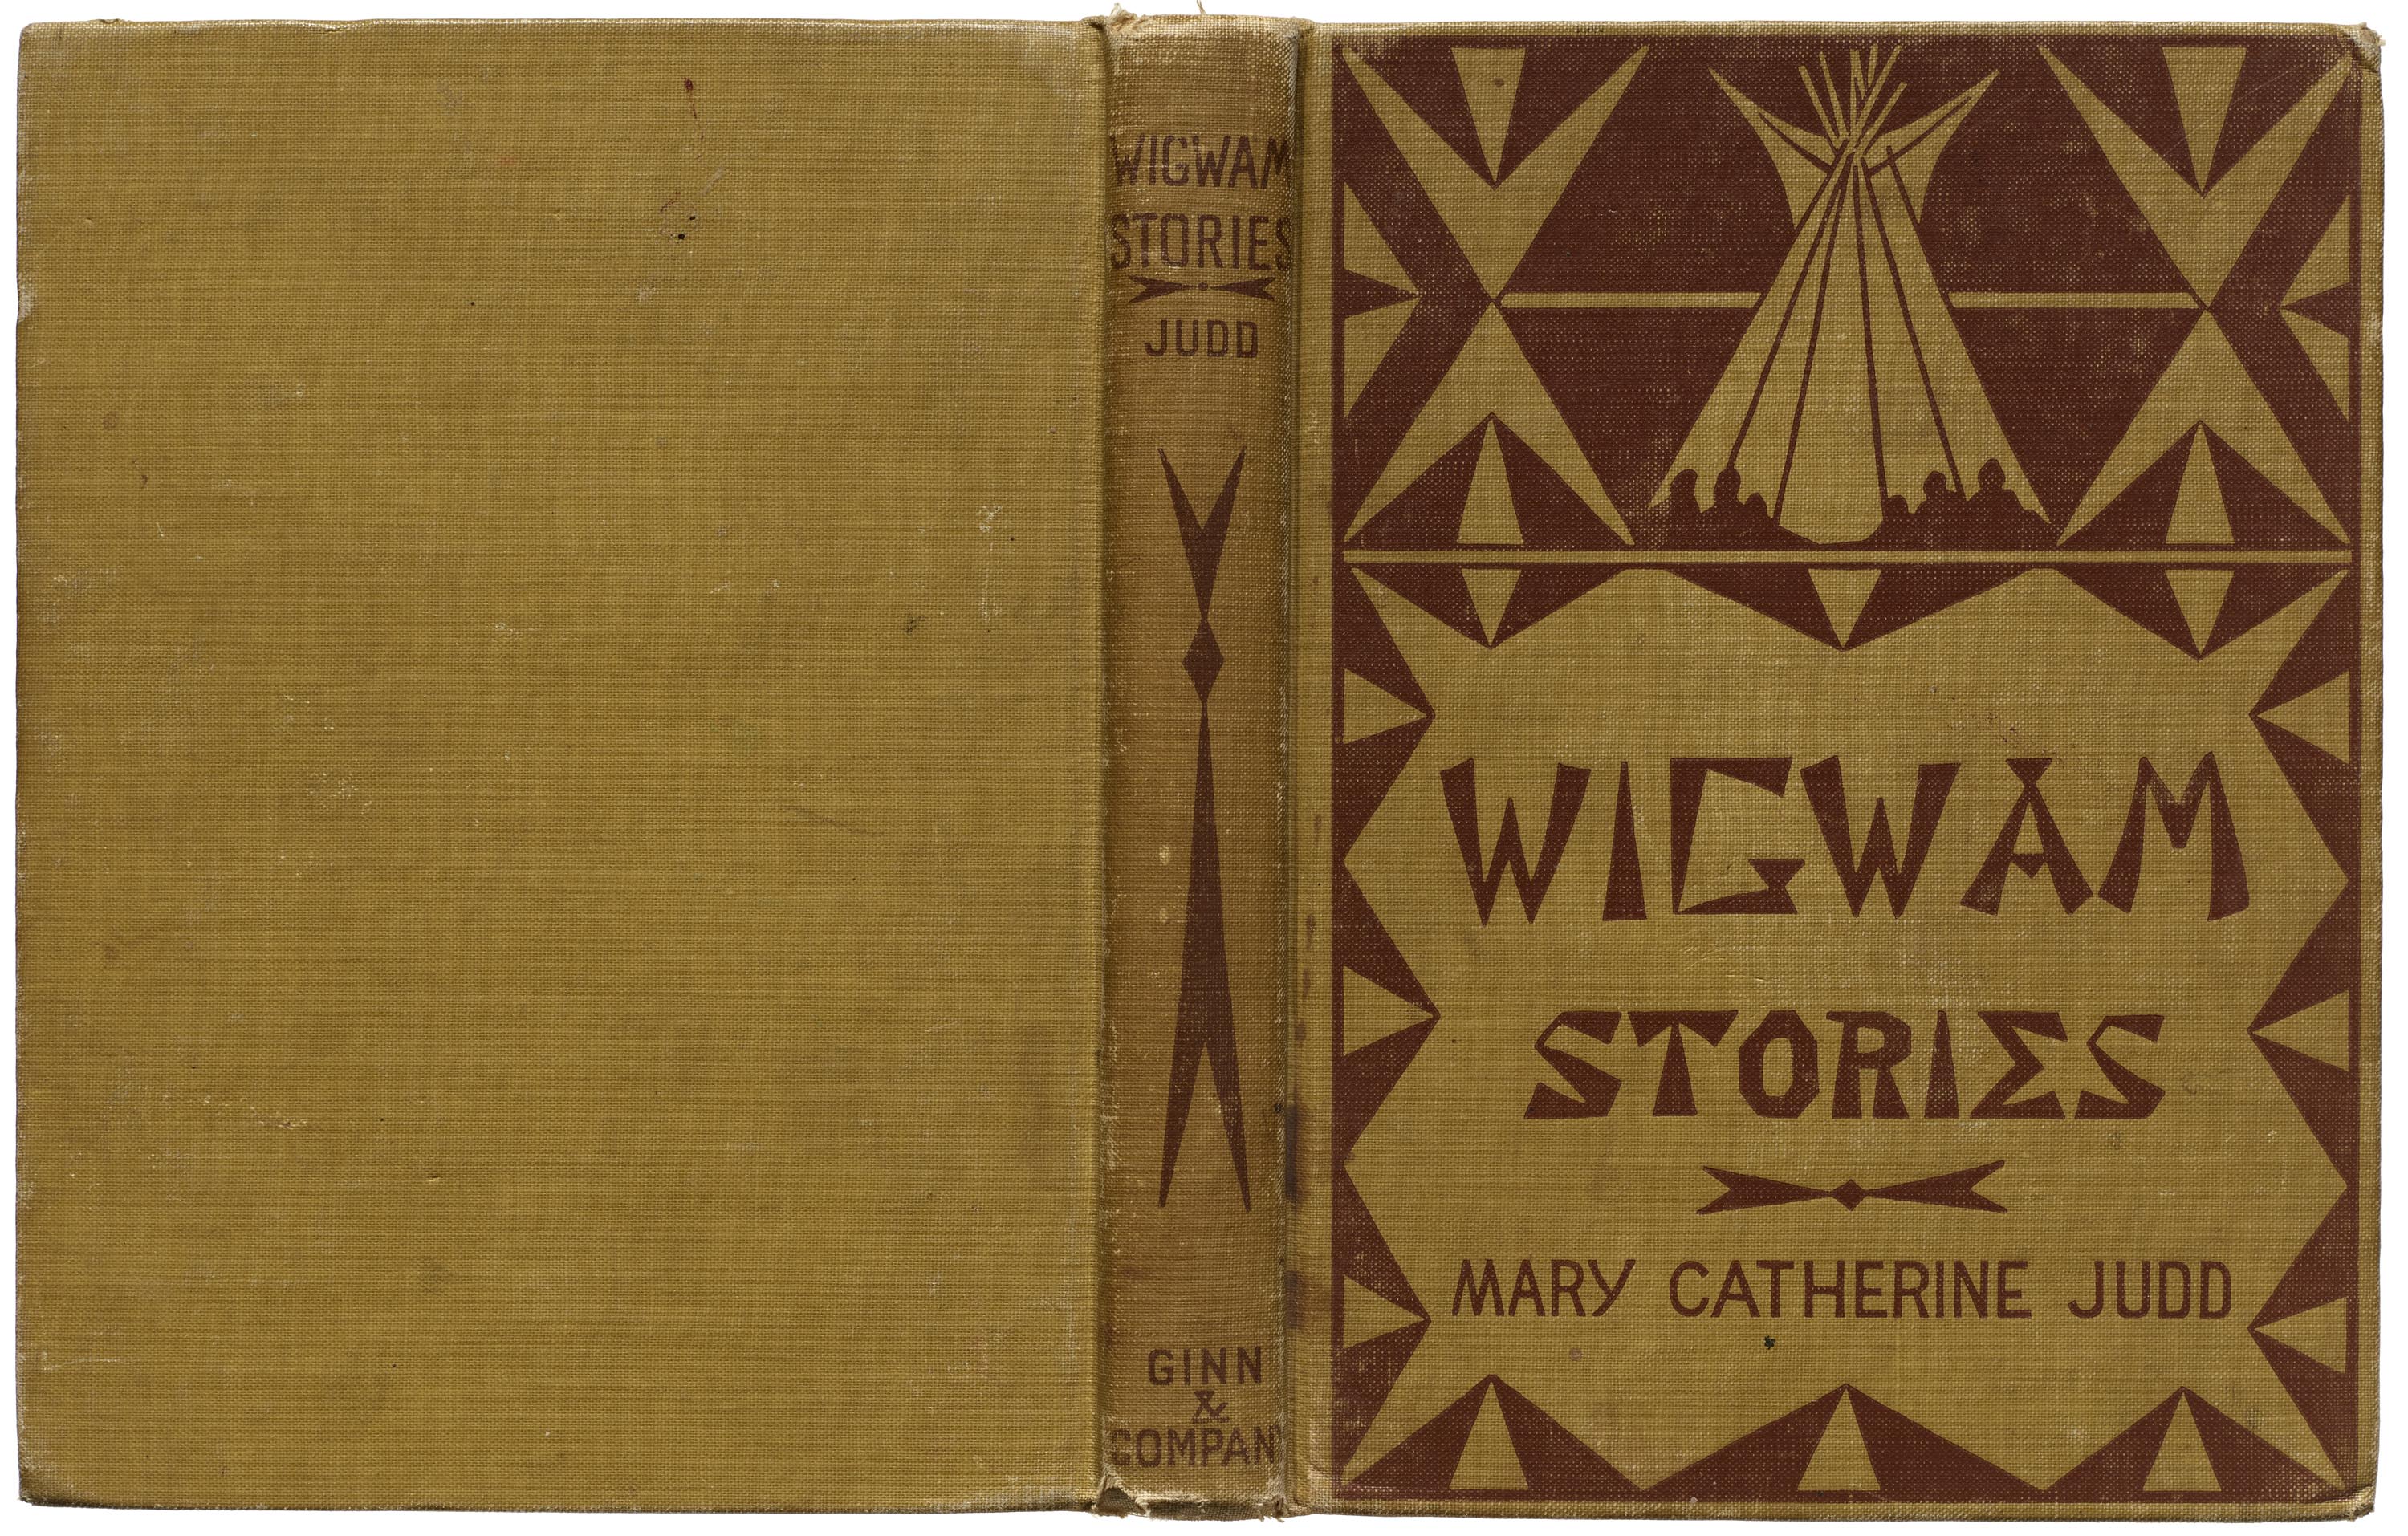 Angel DeCora, binding for Wigwam Stories, 1906 (first published 1902), Collection of Letterform Archive.